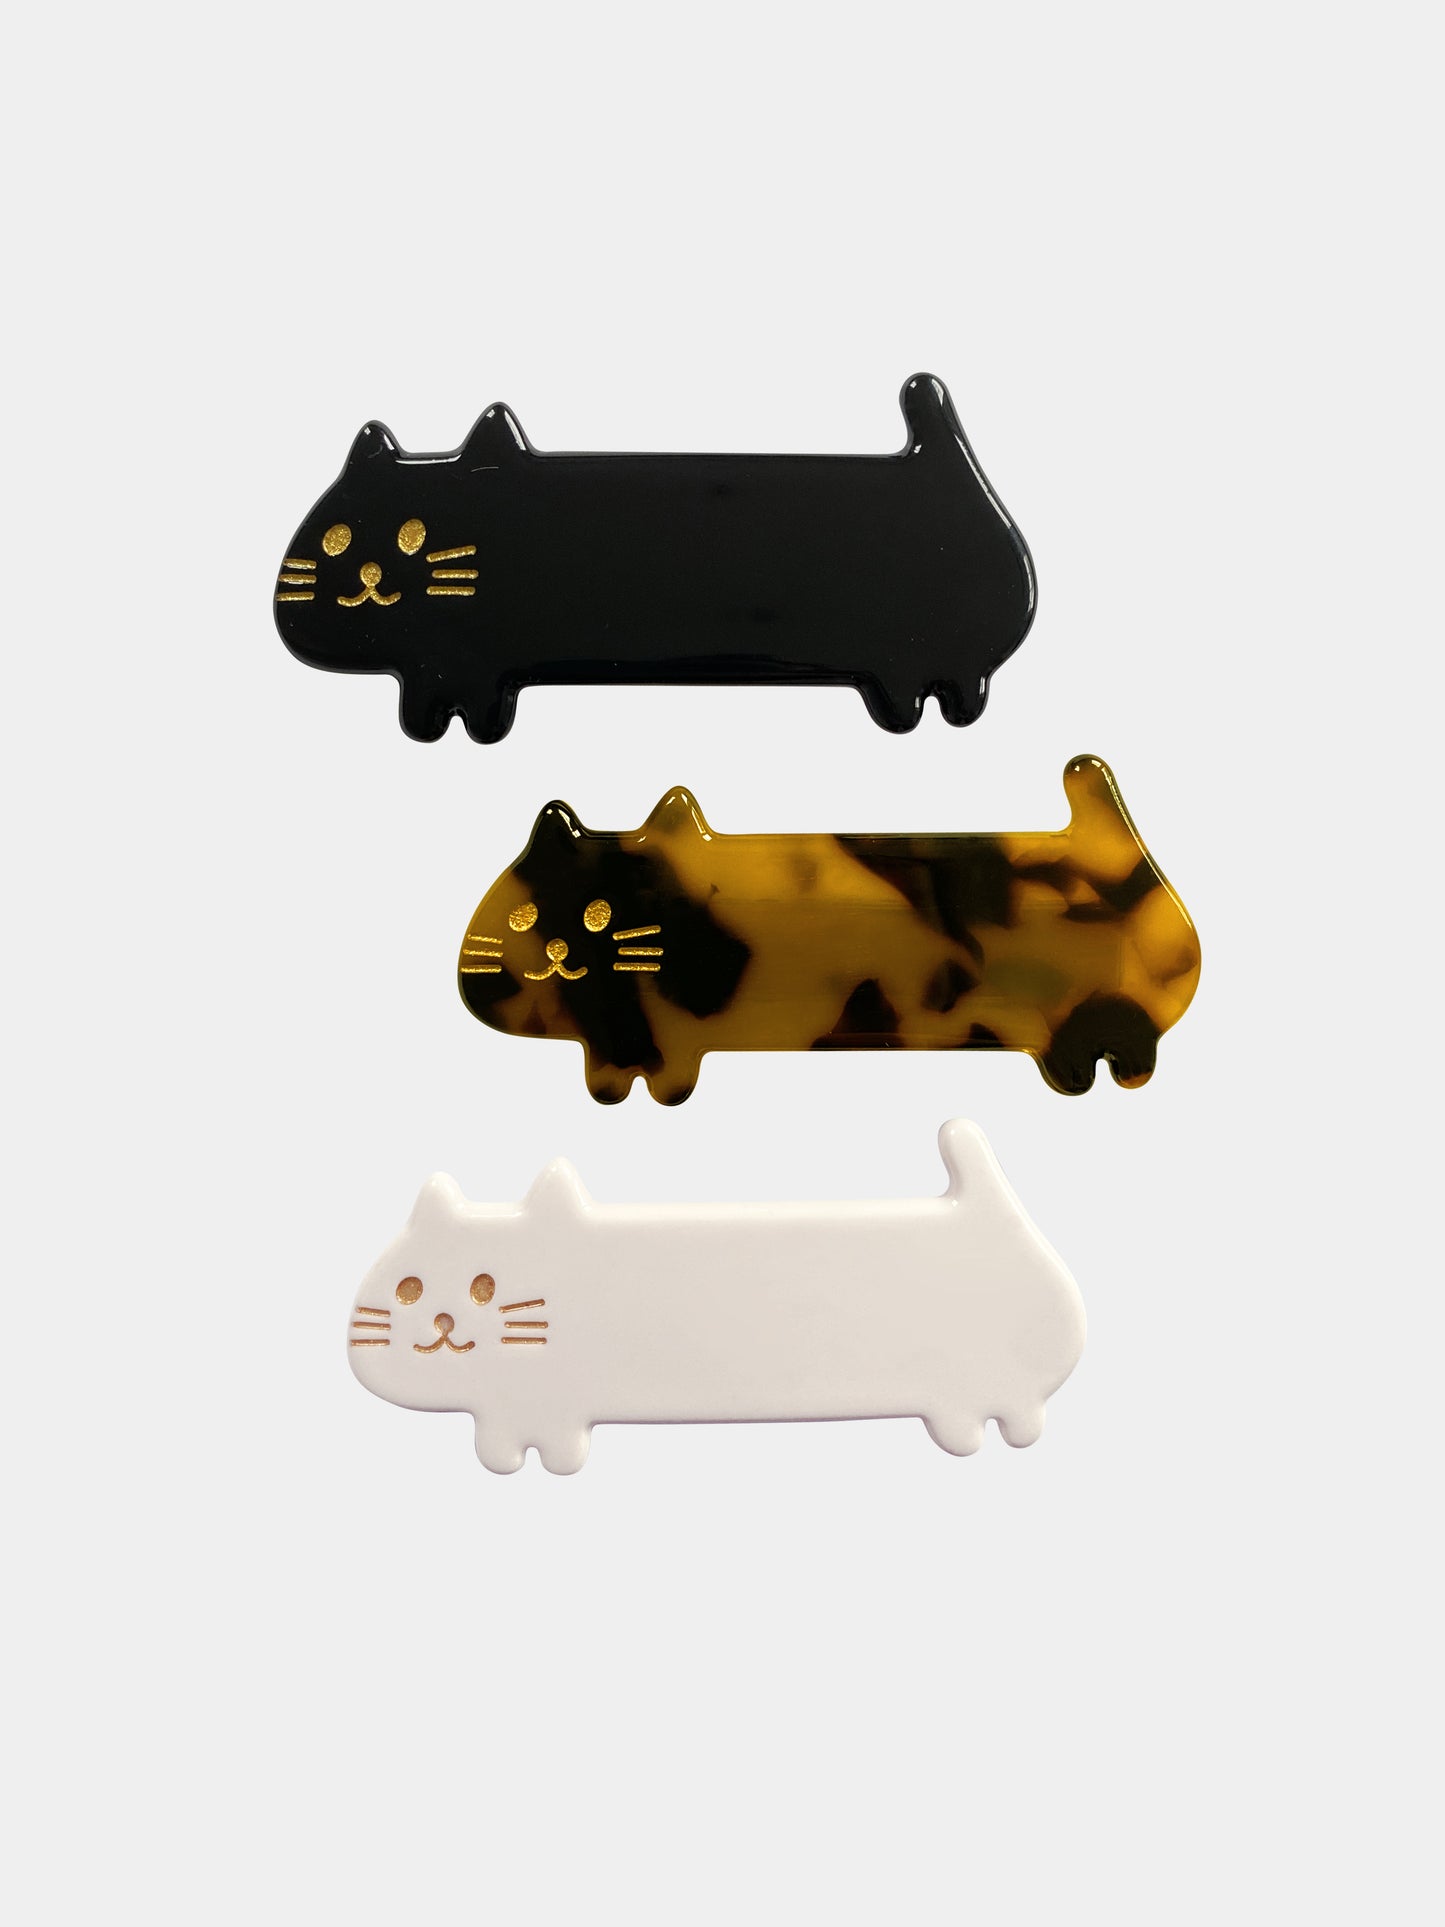 A set of three kids' barrettes in the shape of elongated cats; one black, one tortoiseshell, one white